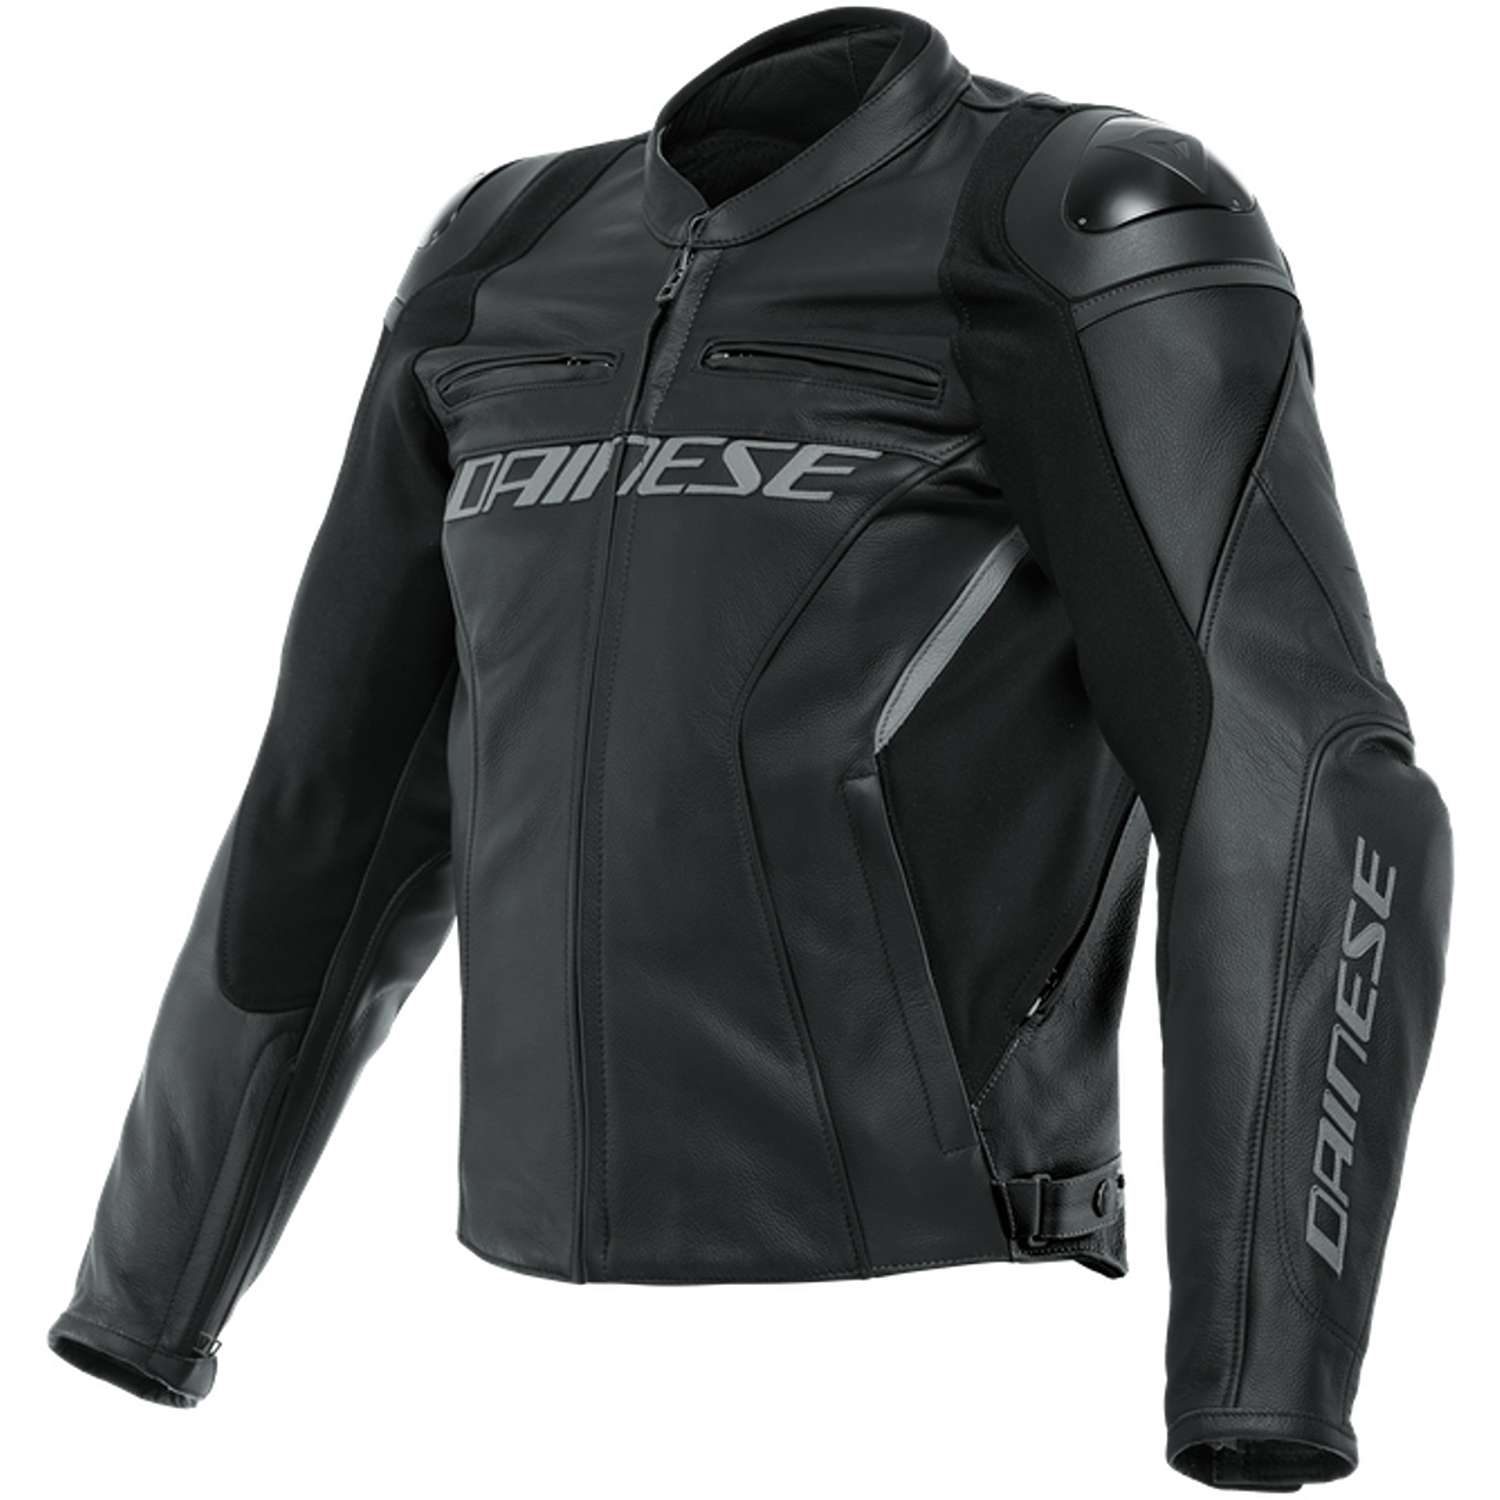 Image of Dainese Racing 4 Leather Jacket S/T Black Size 28 ID 8051019321077